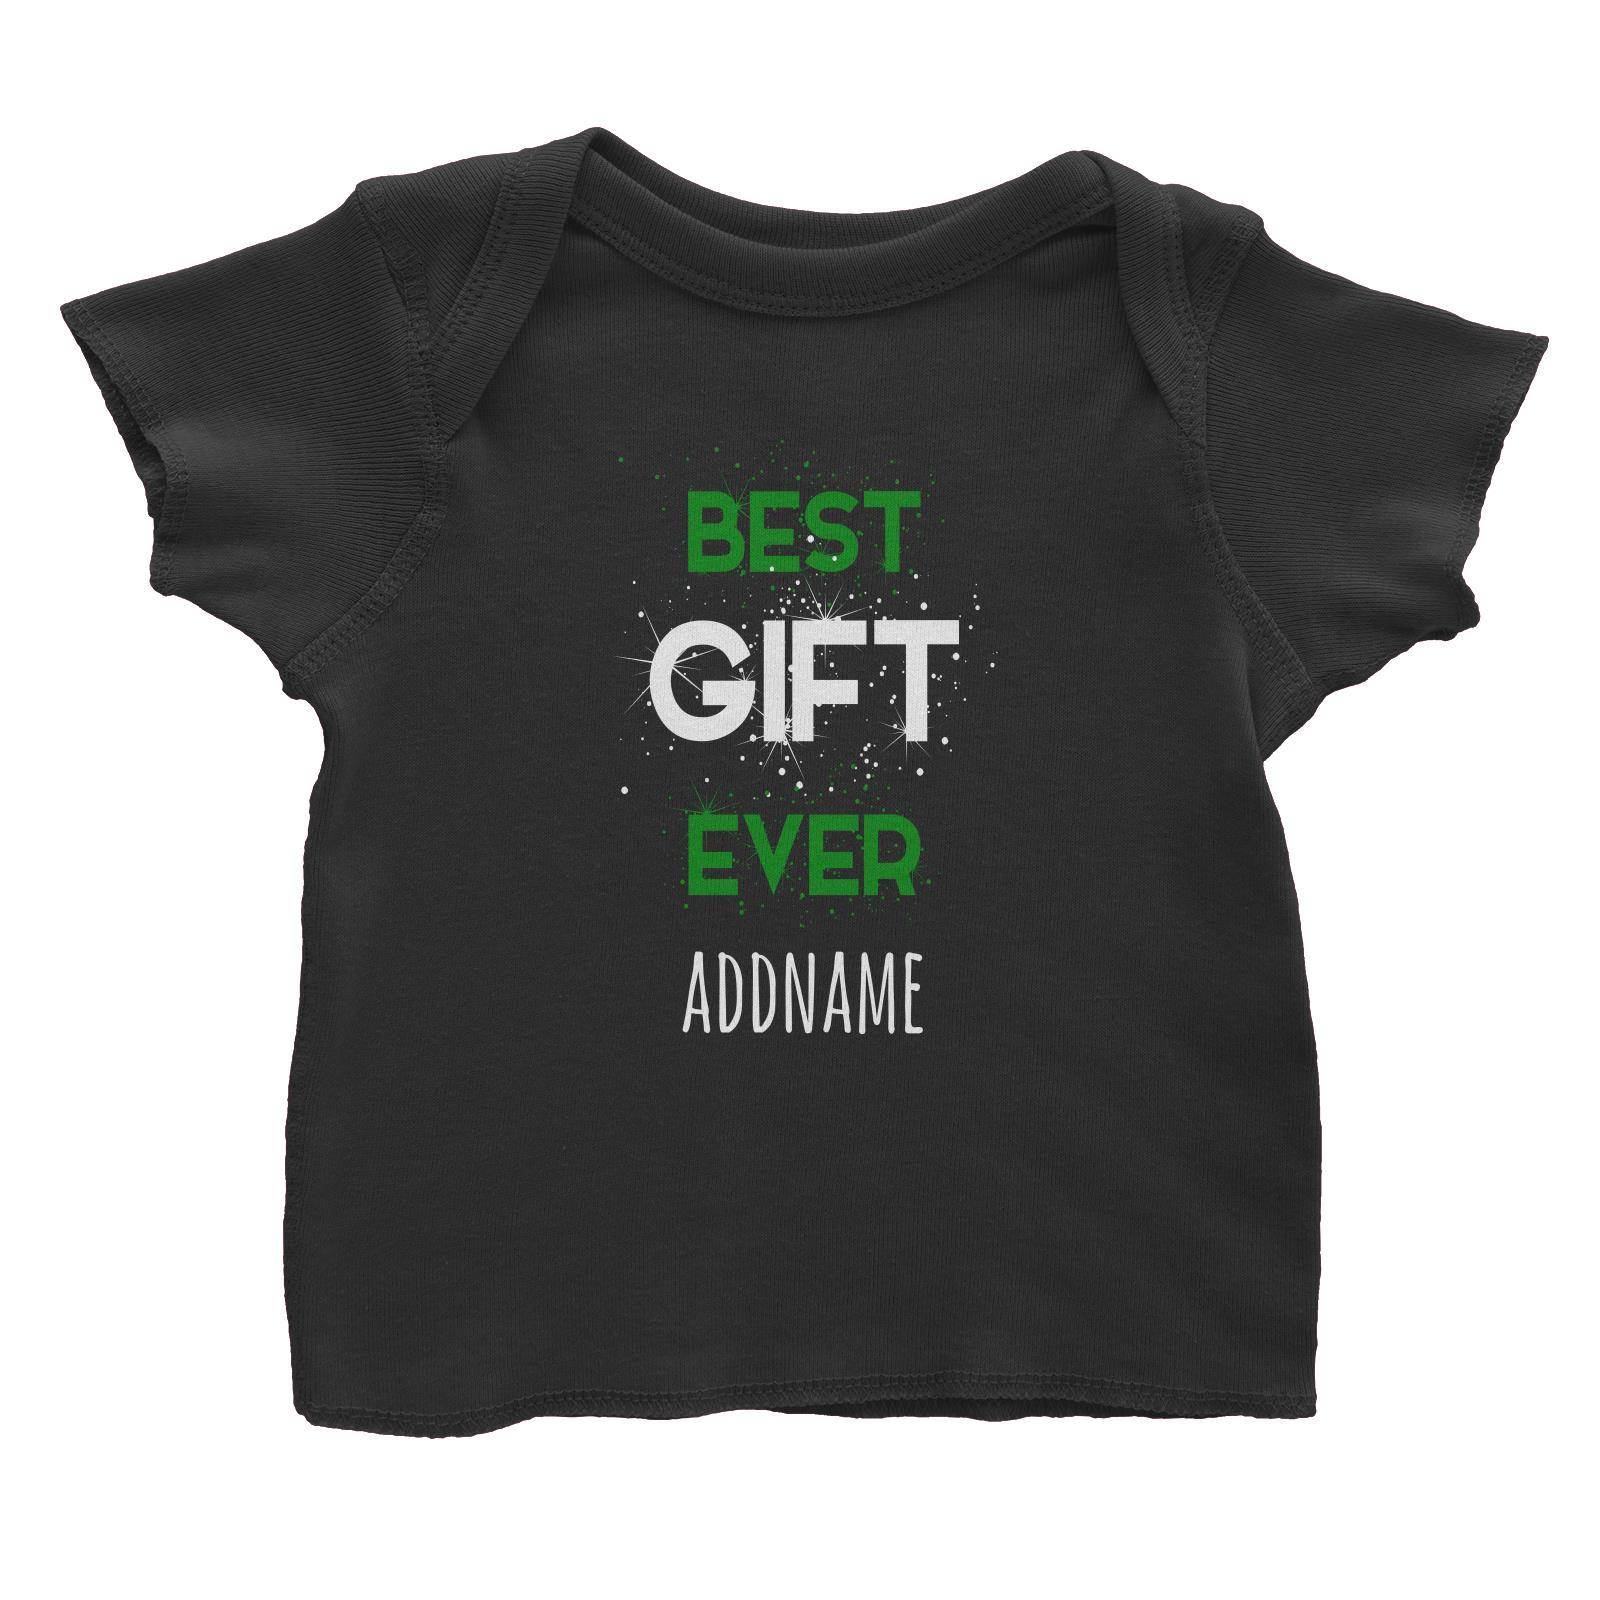 Best Gift Ever Addname Baby T-Shirt Christmas Matching Family Lettering Funny Personalizable Designs